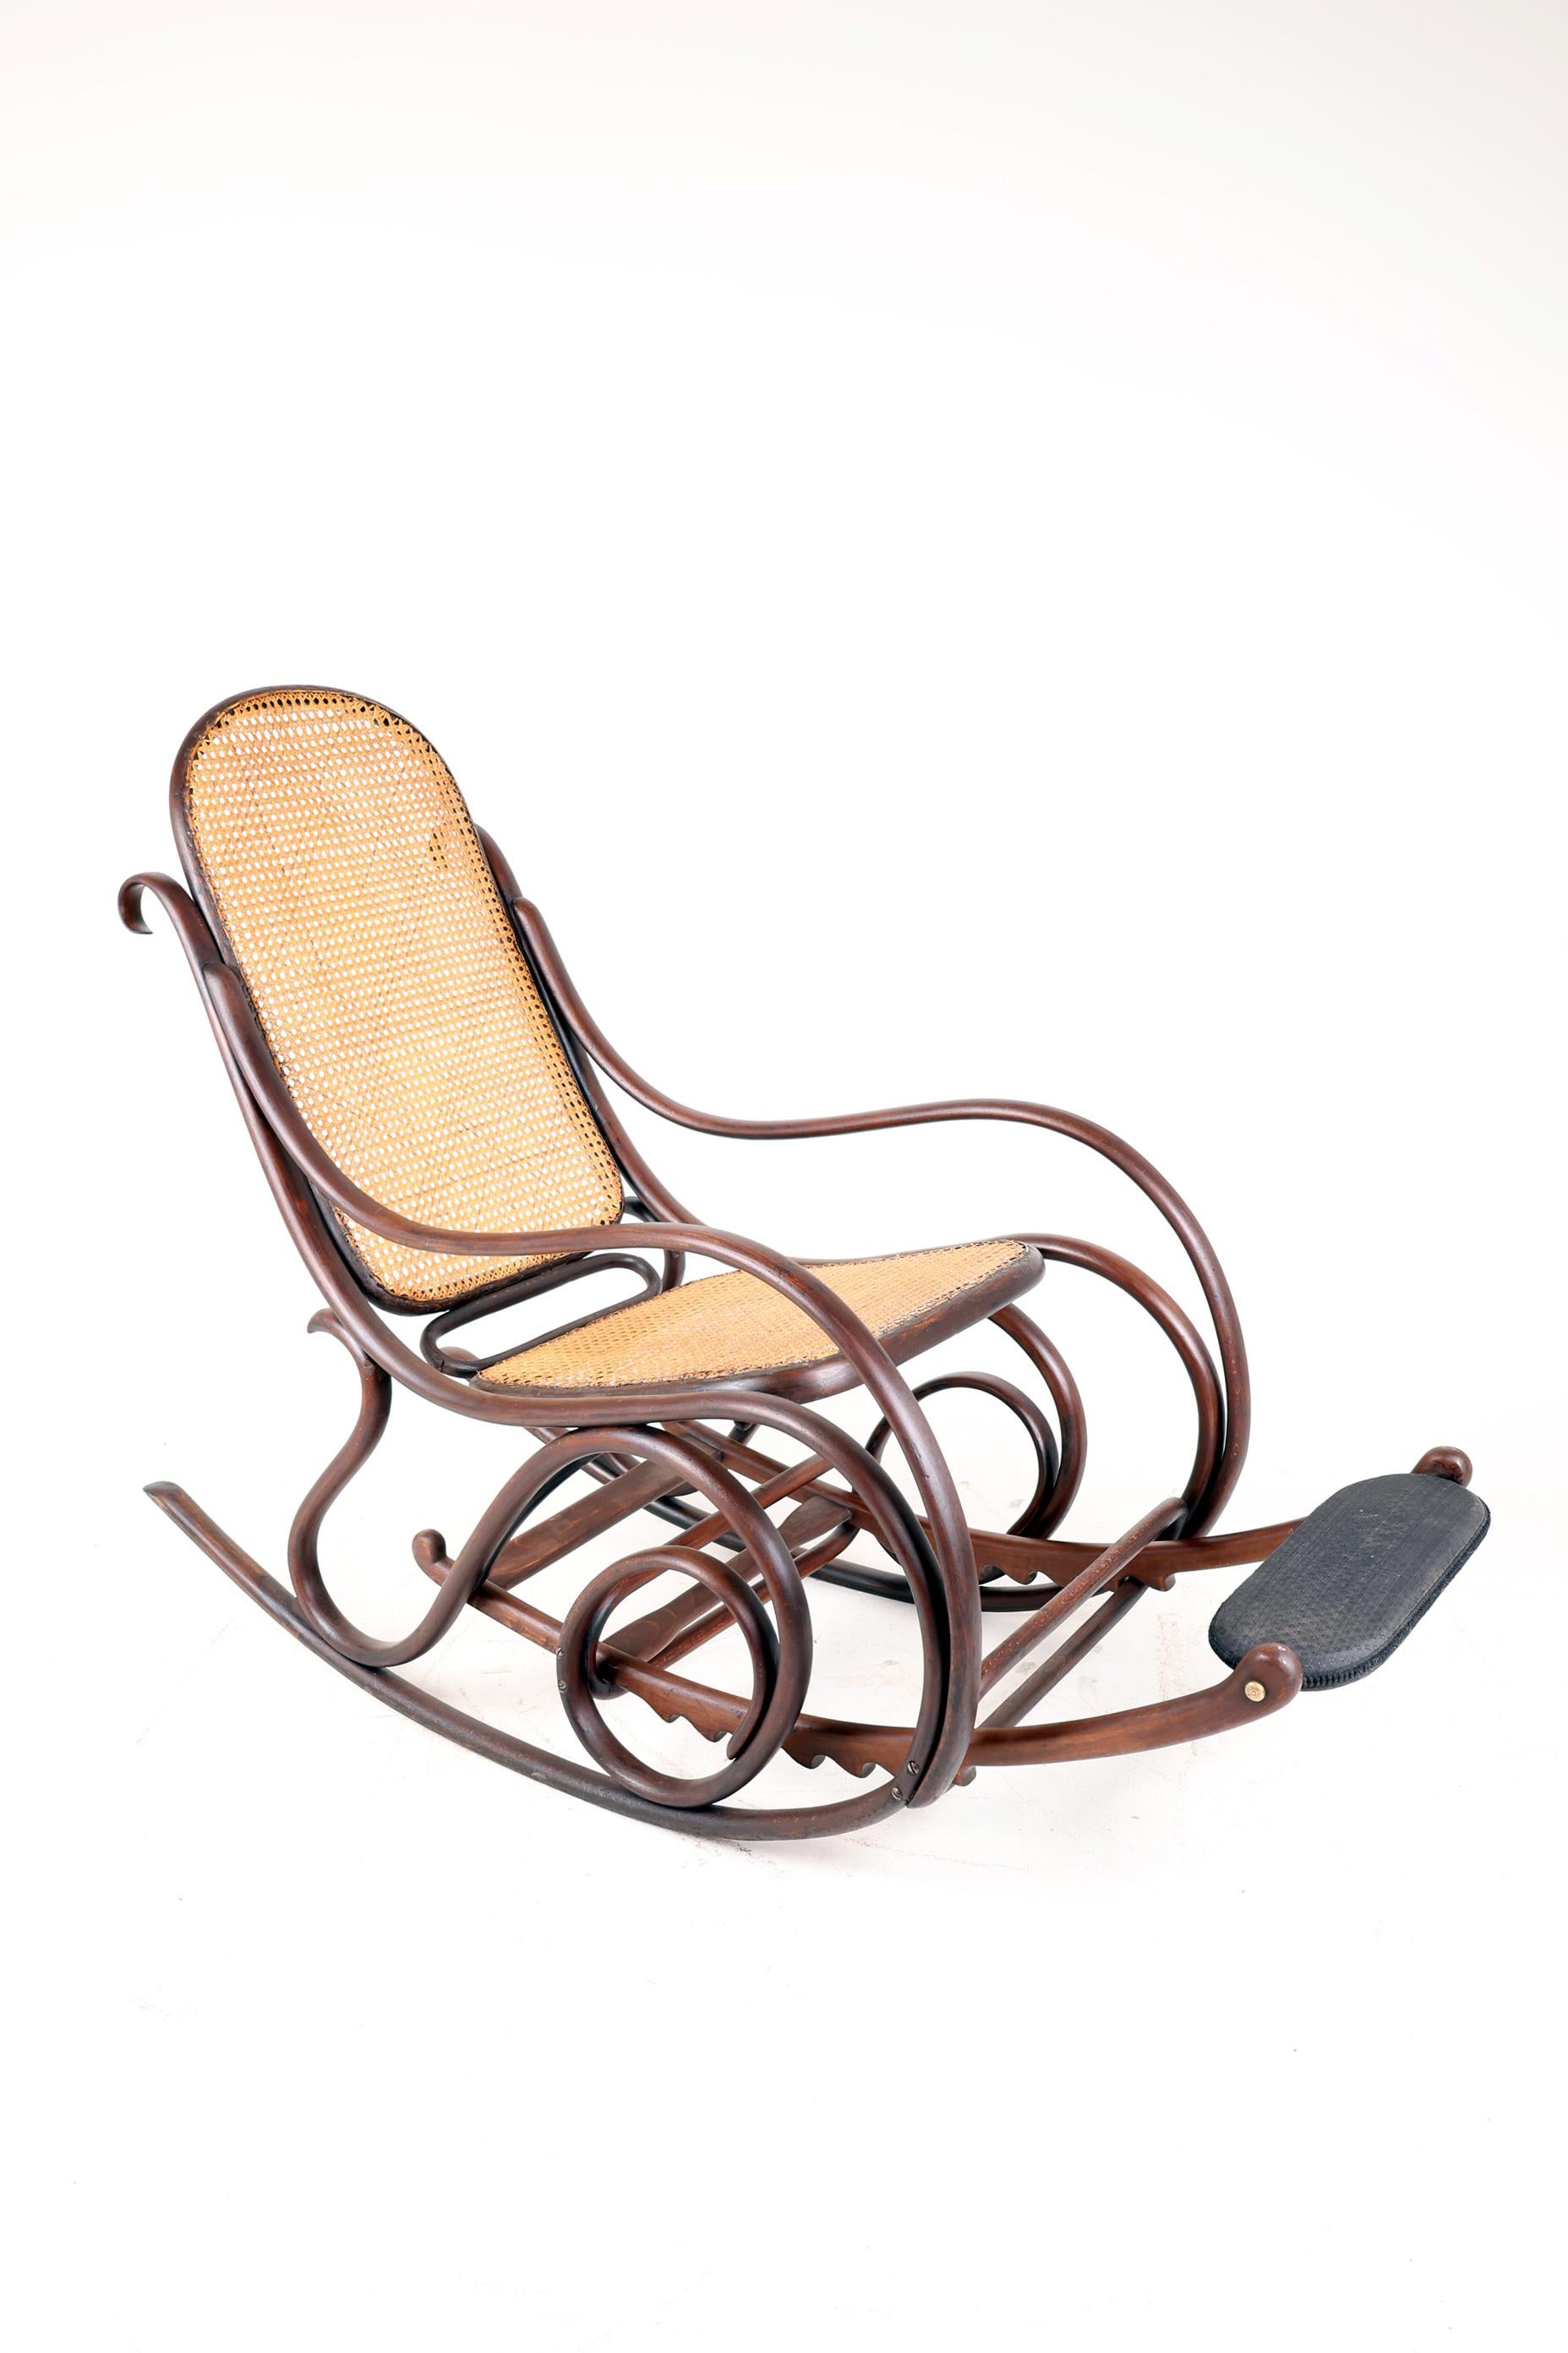 Oiled Rocking Chair And Its Footrest, Beech, Spirit 